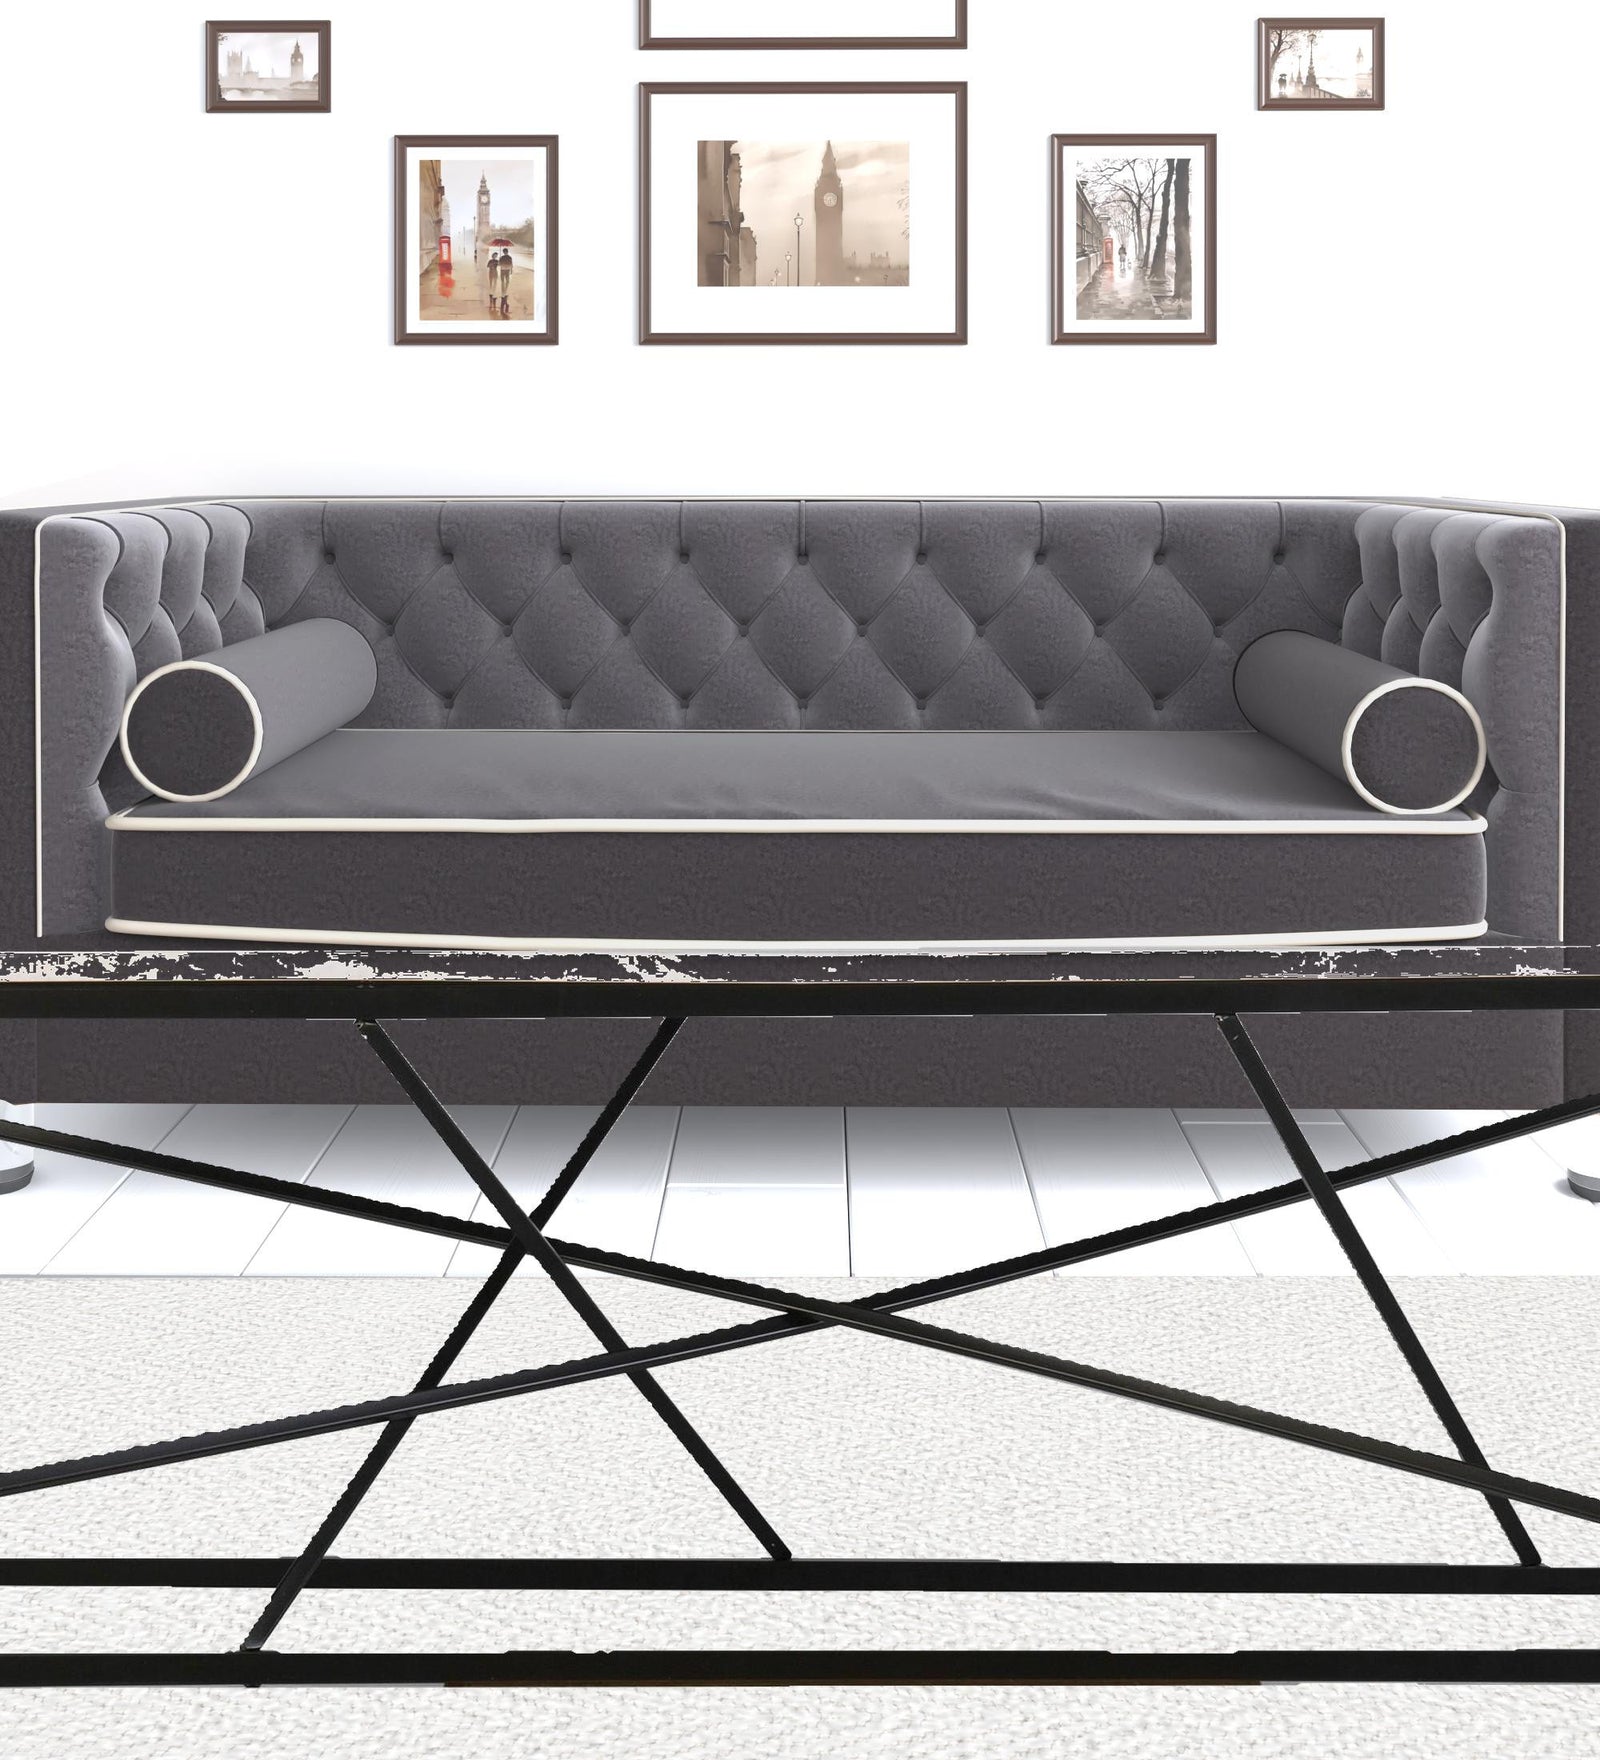 50" Black And White Faux Marble and Metal Geo Rectangular Coffee Table